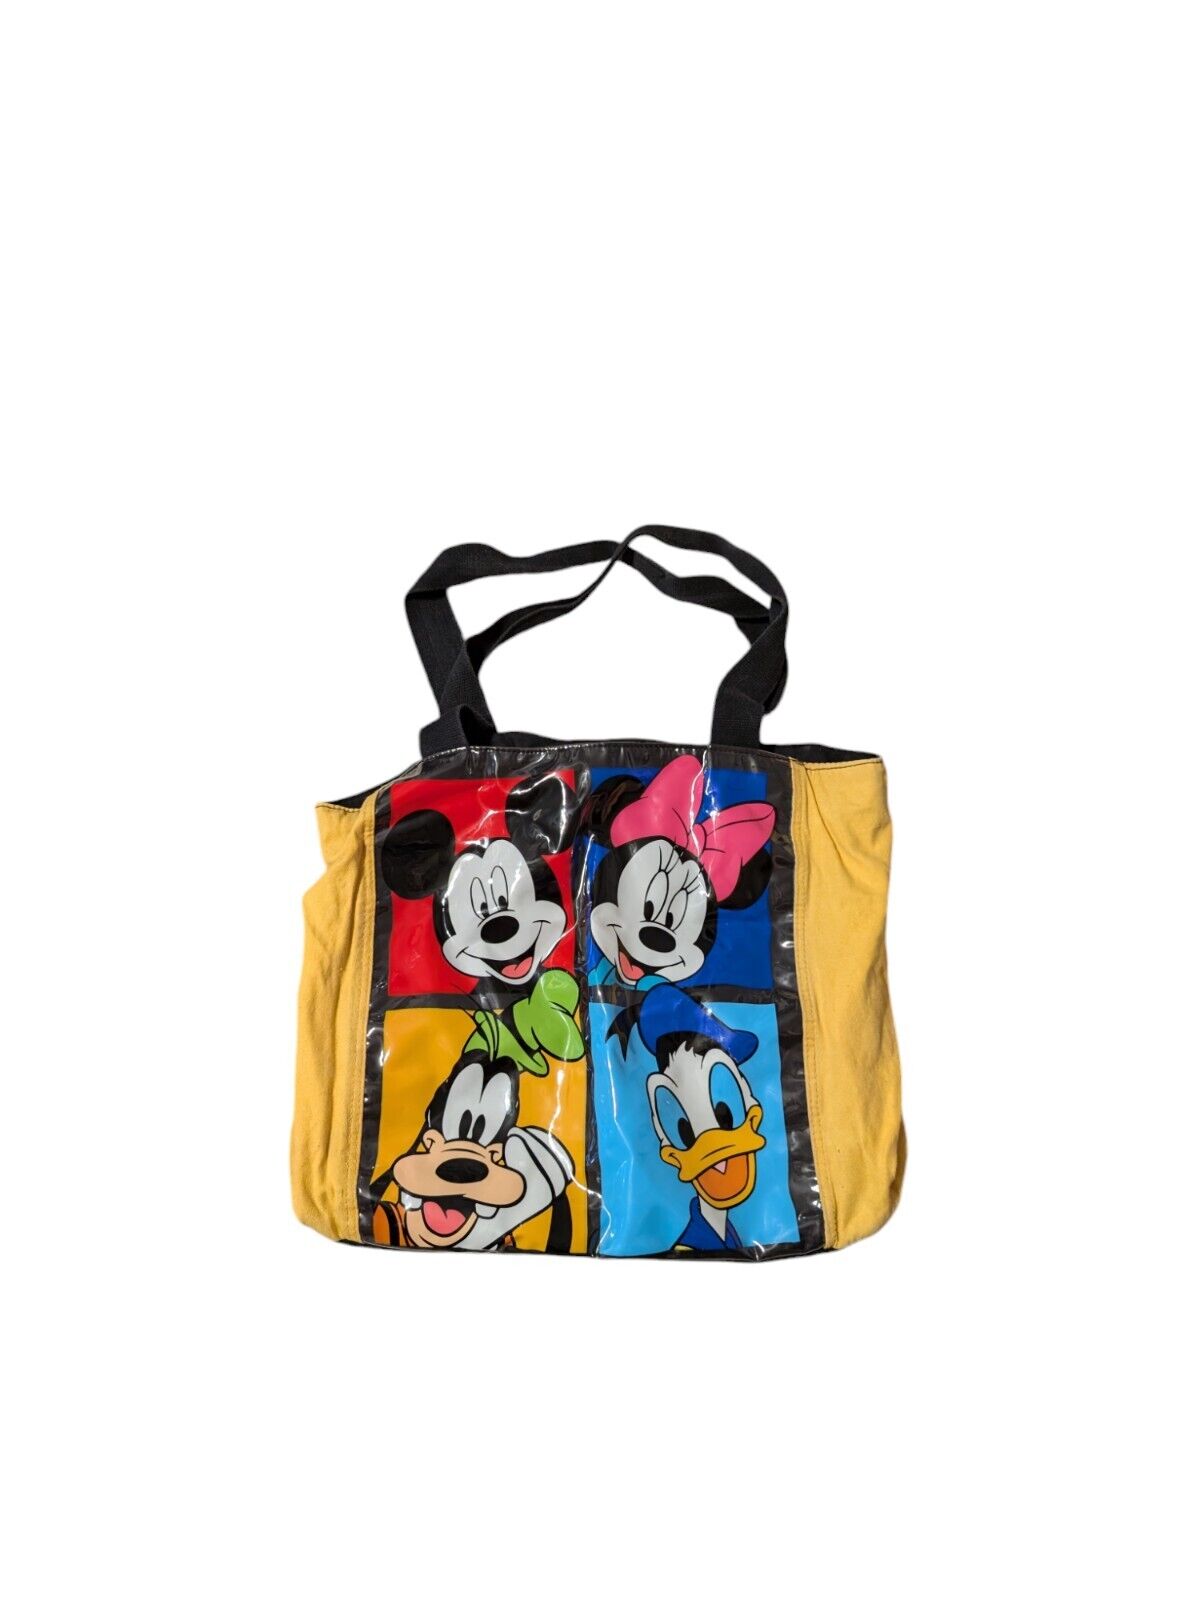 Vintage Mickey Unlimited Tote Bag Mickey Minnie Donald Goofy 90s